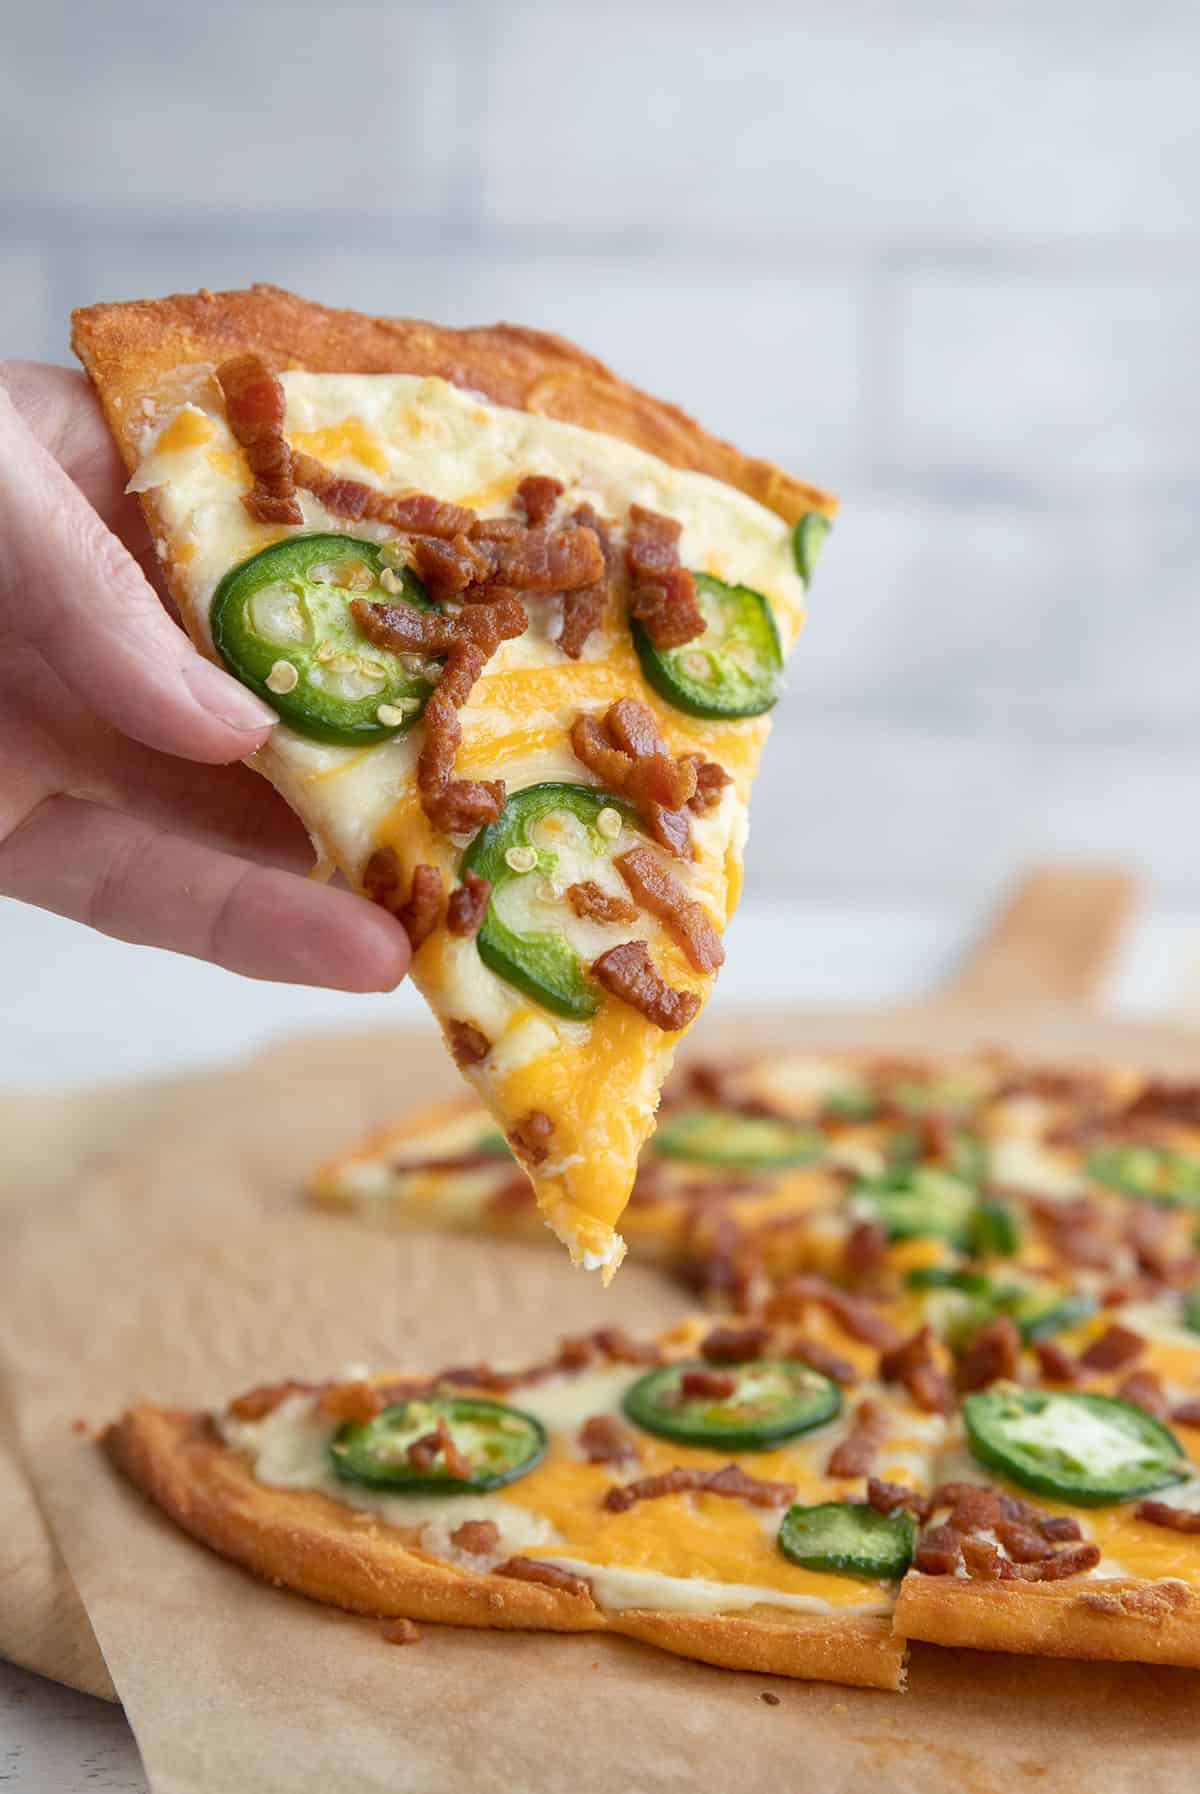 A hand lifting a slice of Jalapeno Popper Pizza out of the main pizza.